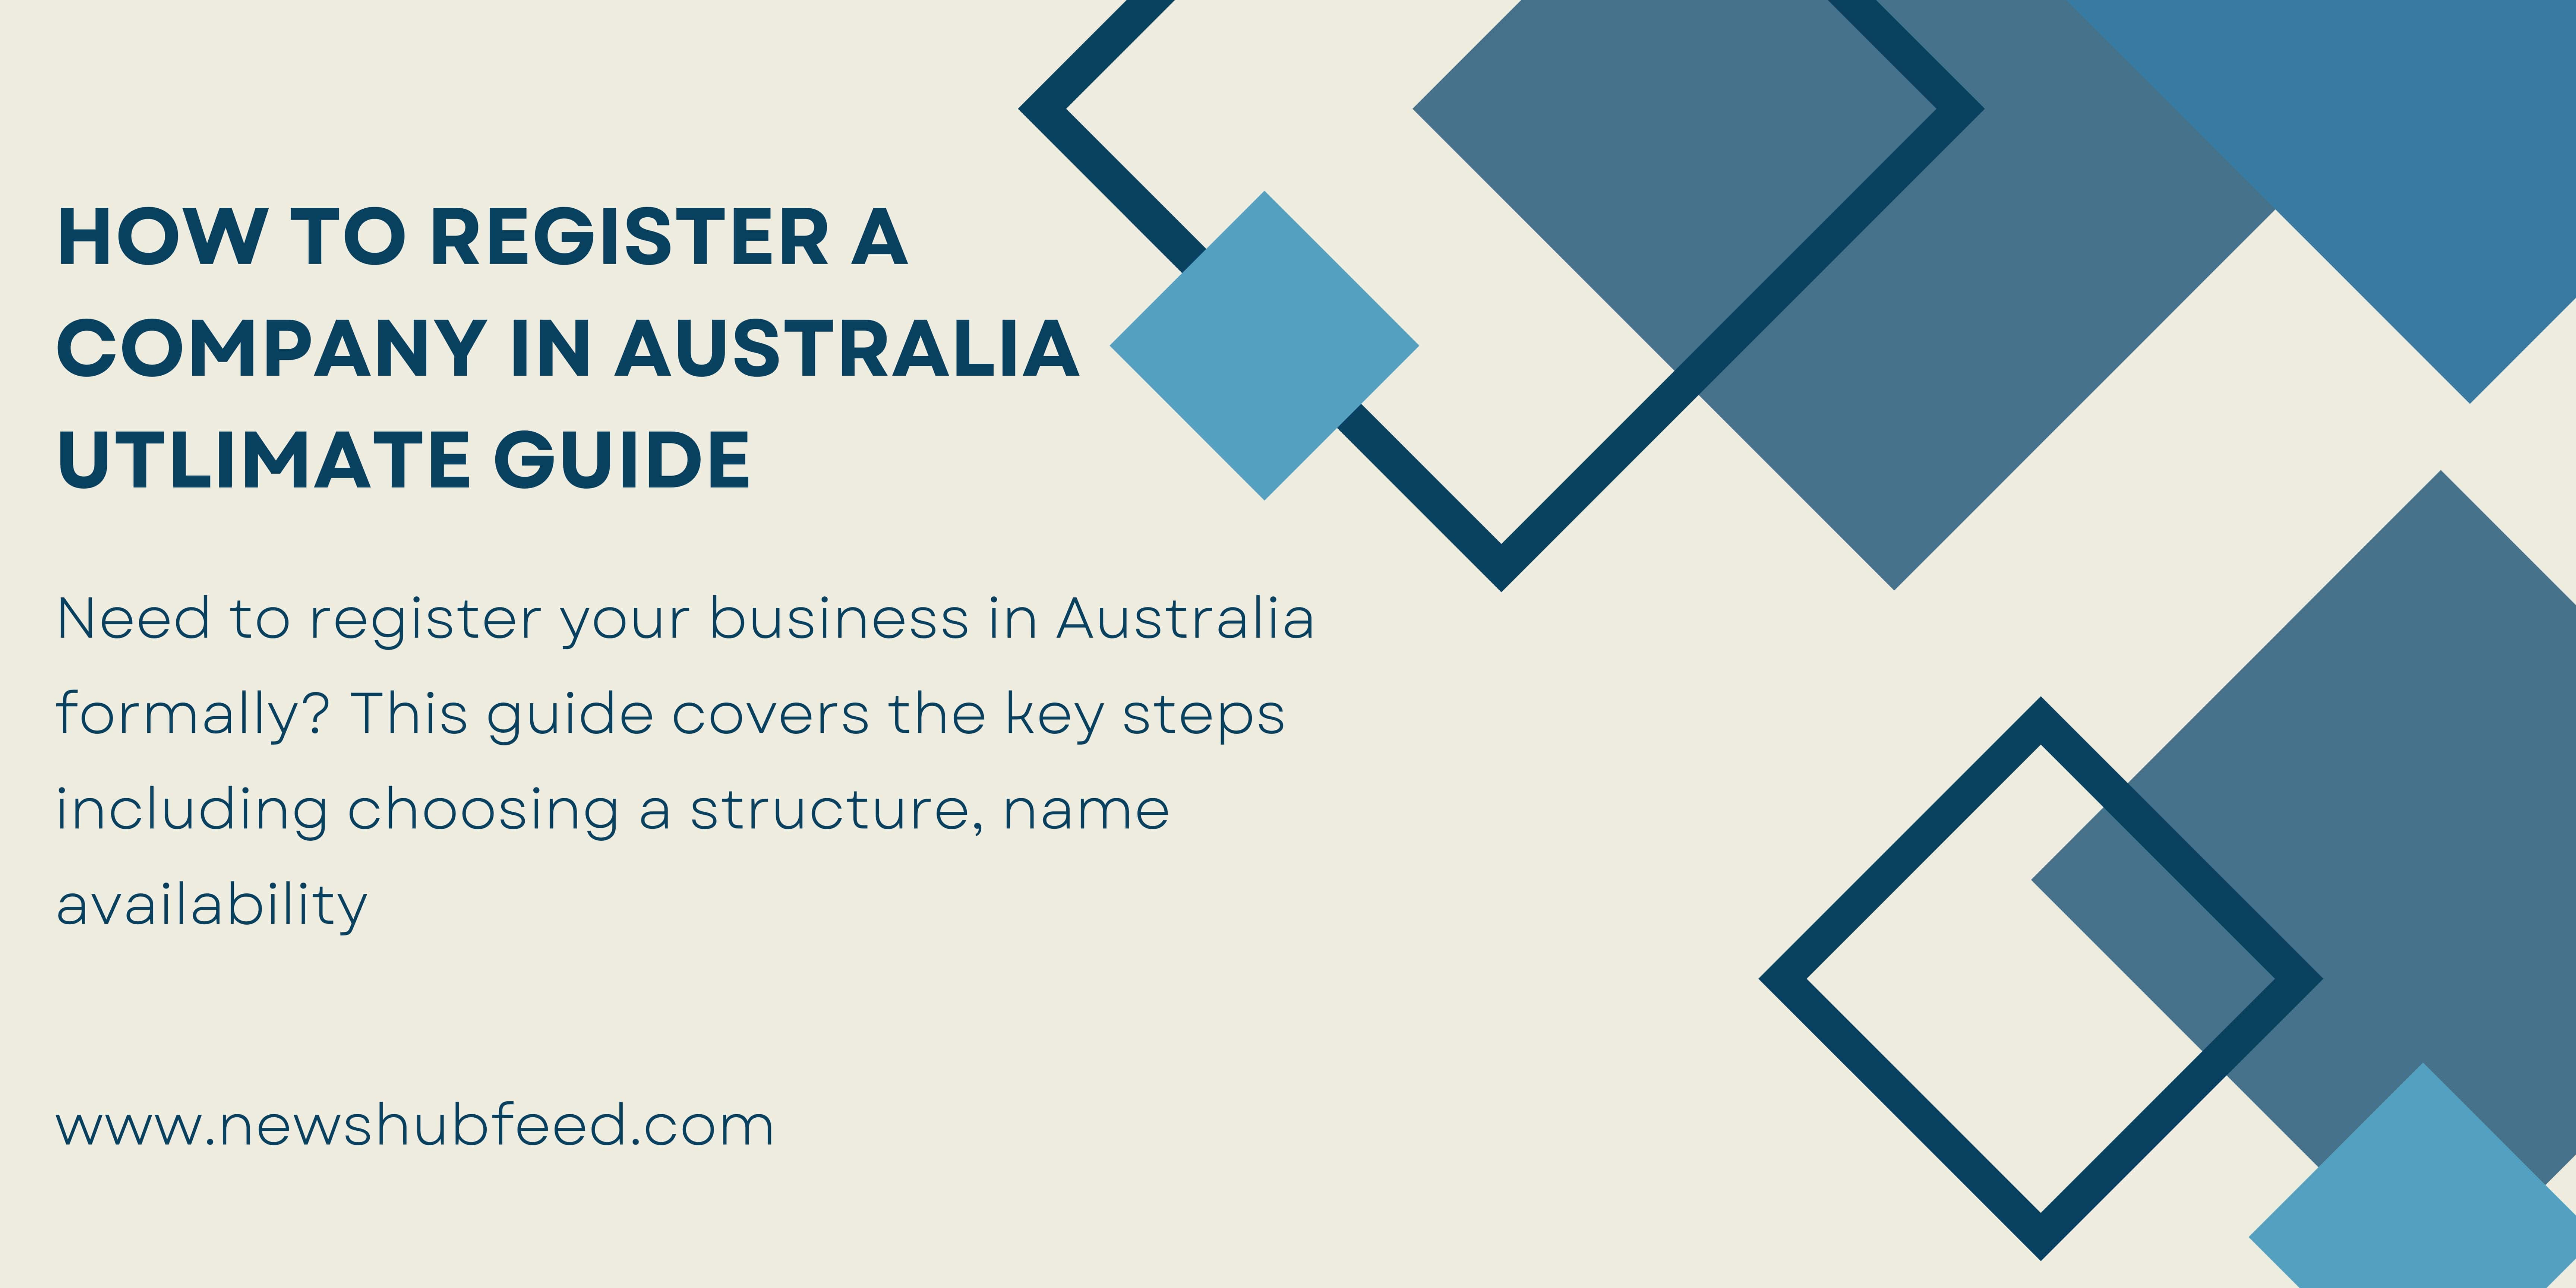 How to Register a Company in Australia